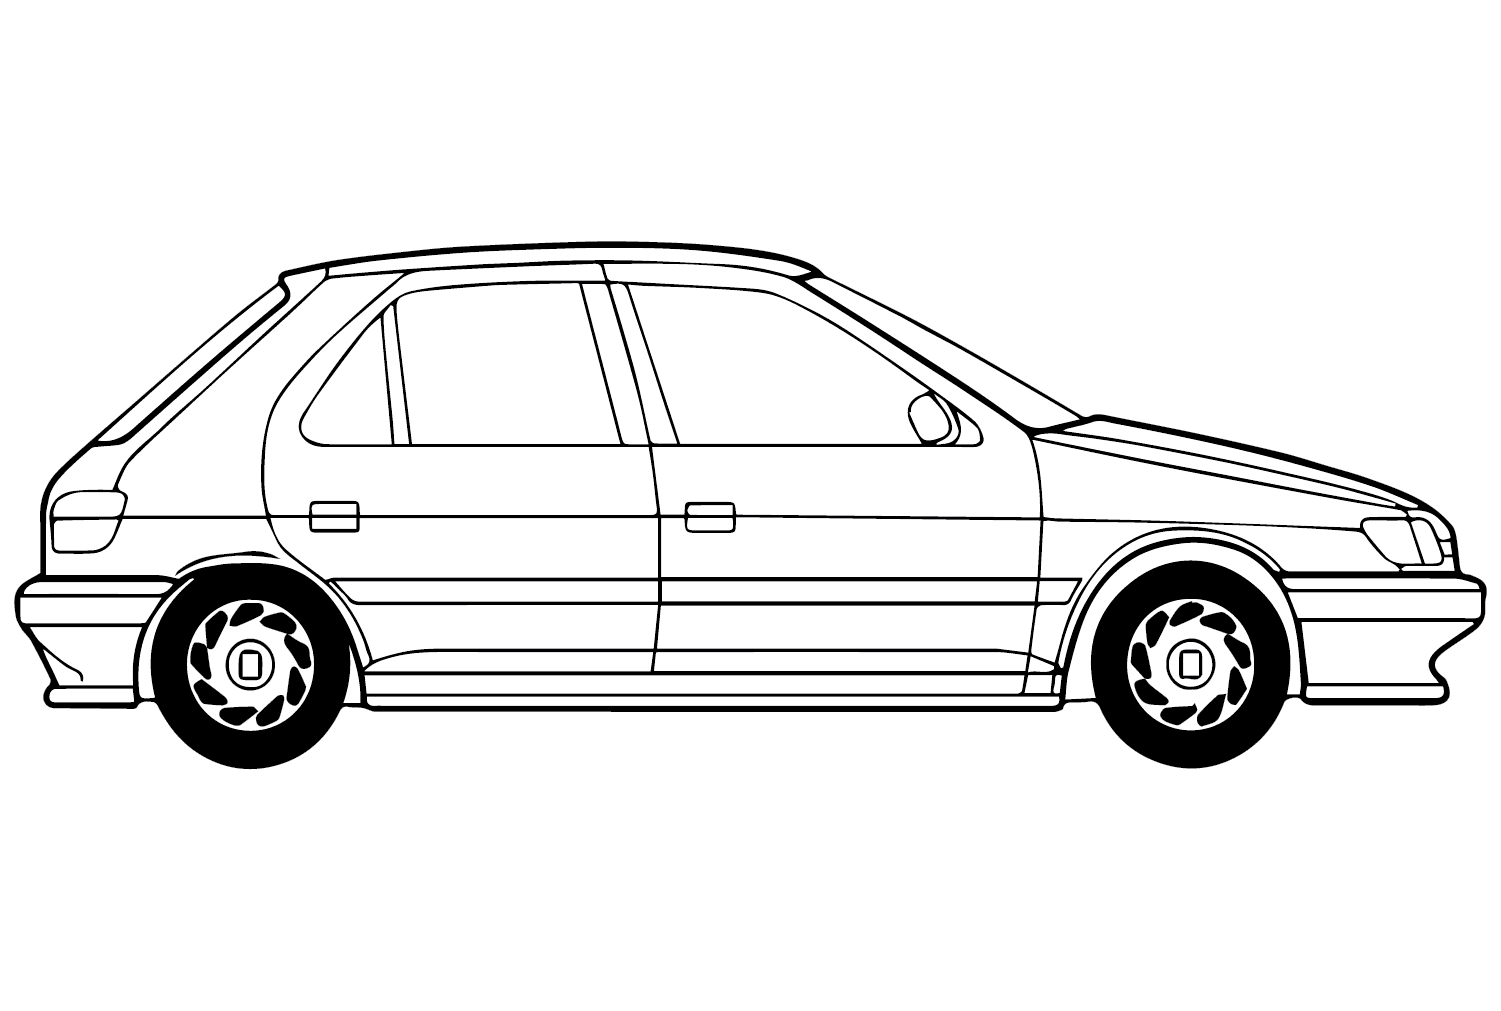 Peugeot 306 Coloring Page from Peugeot